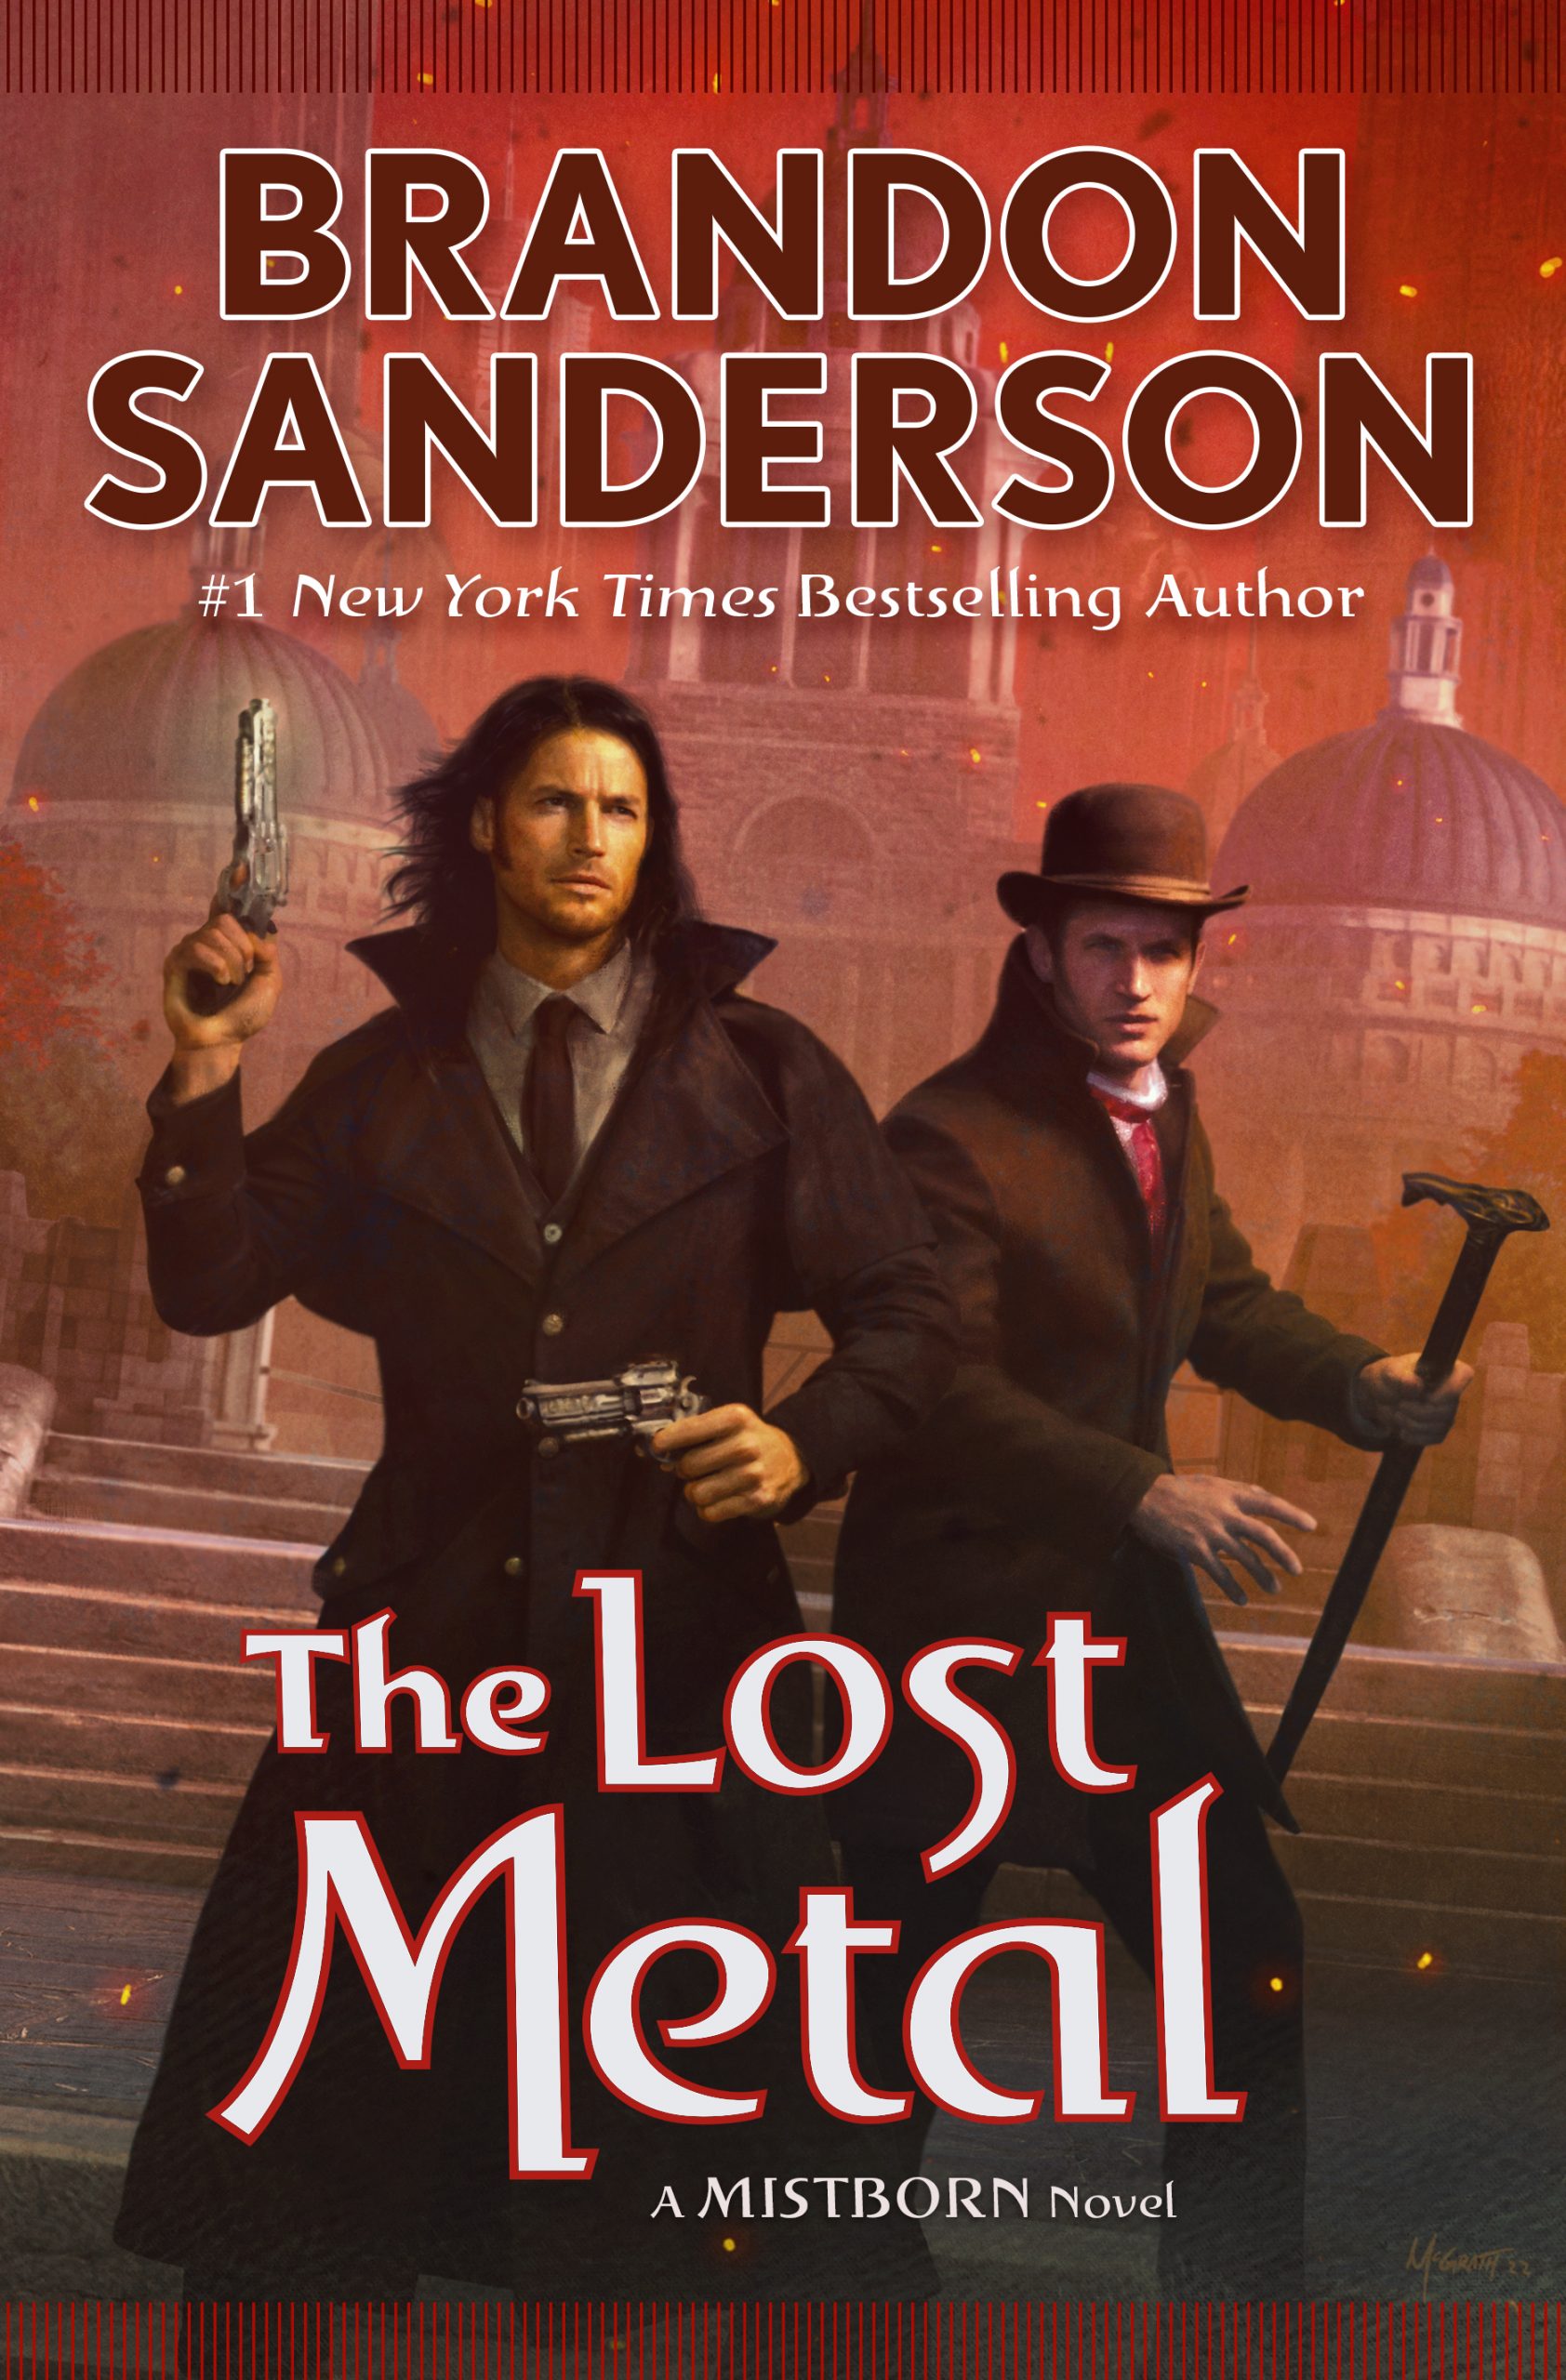 The Lost Metal (Mistborn, #7)